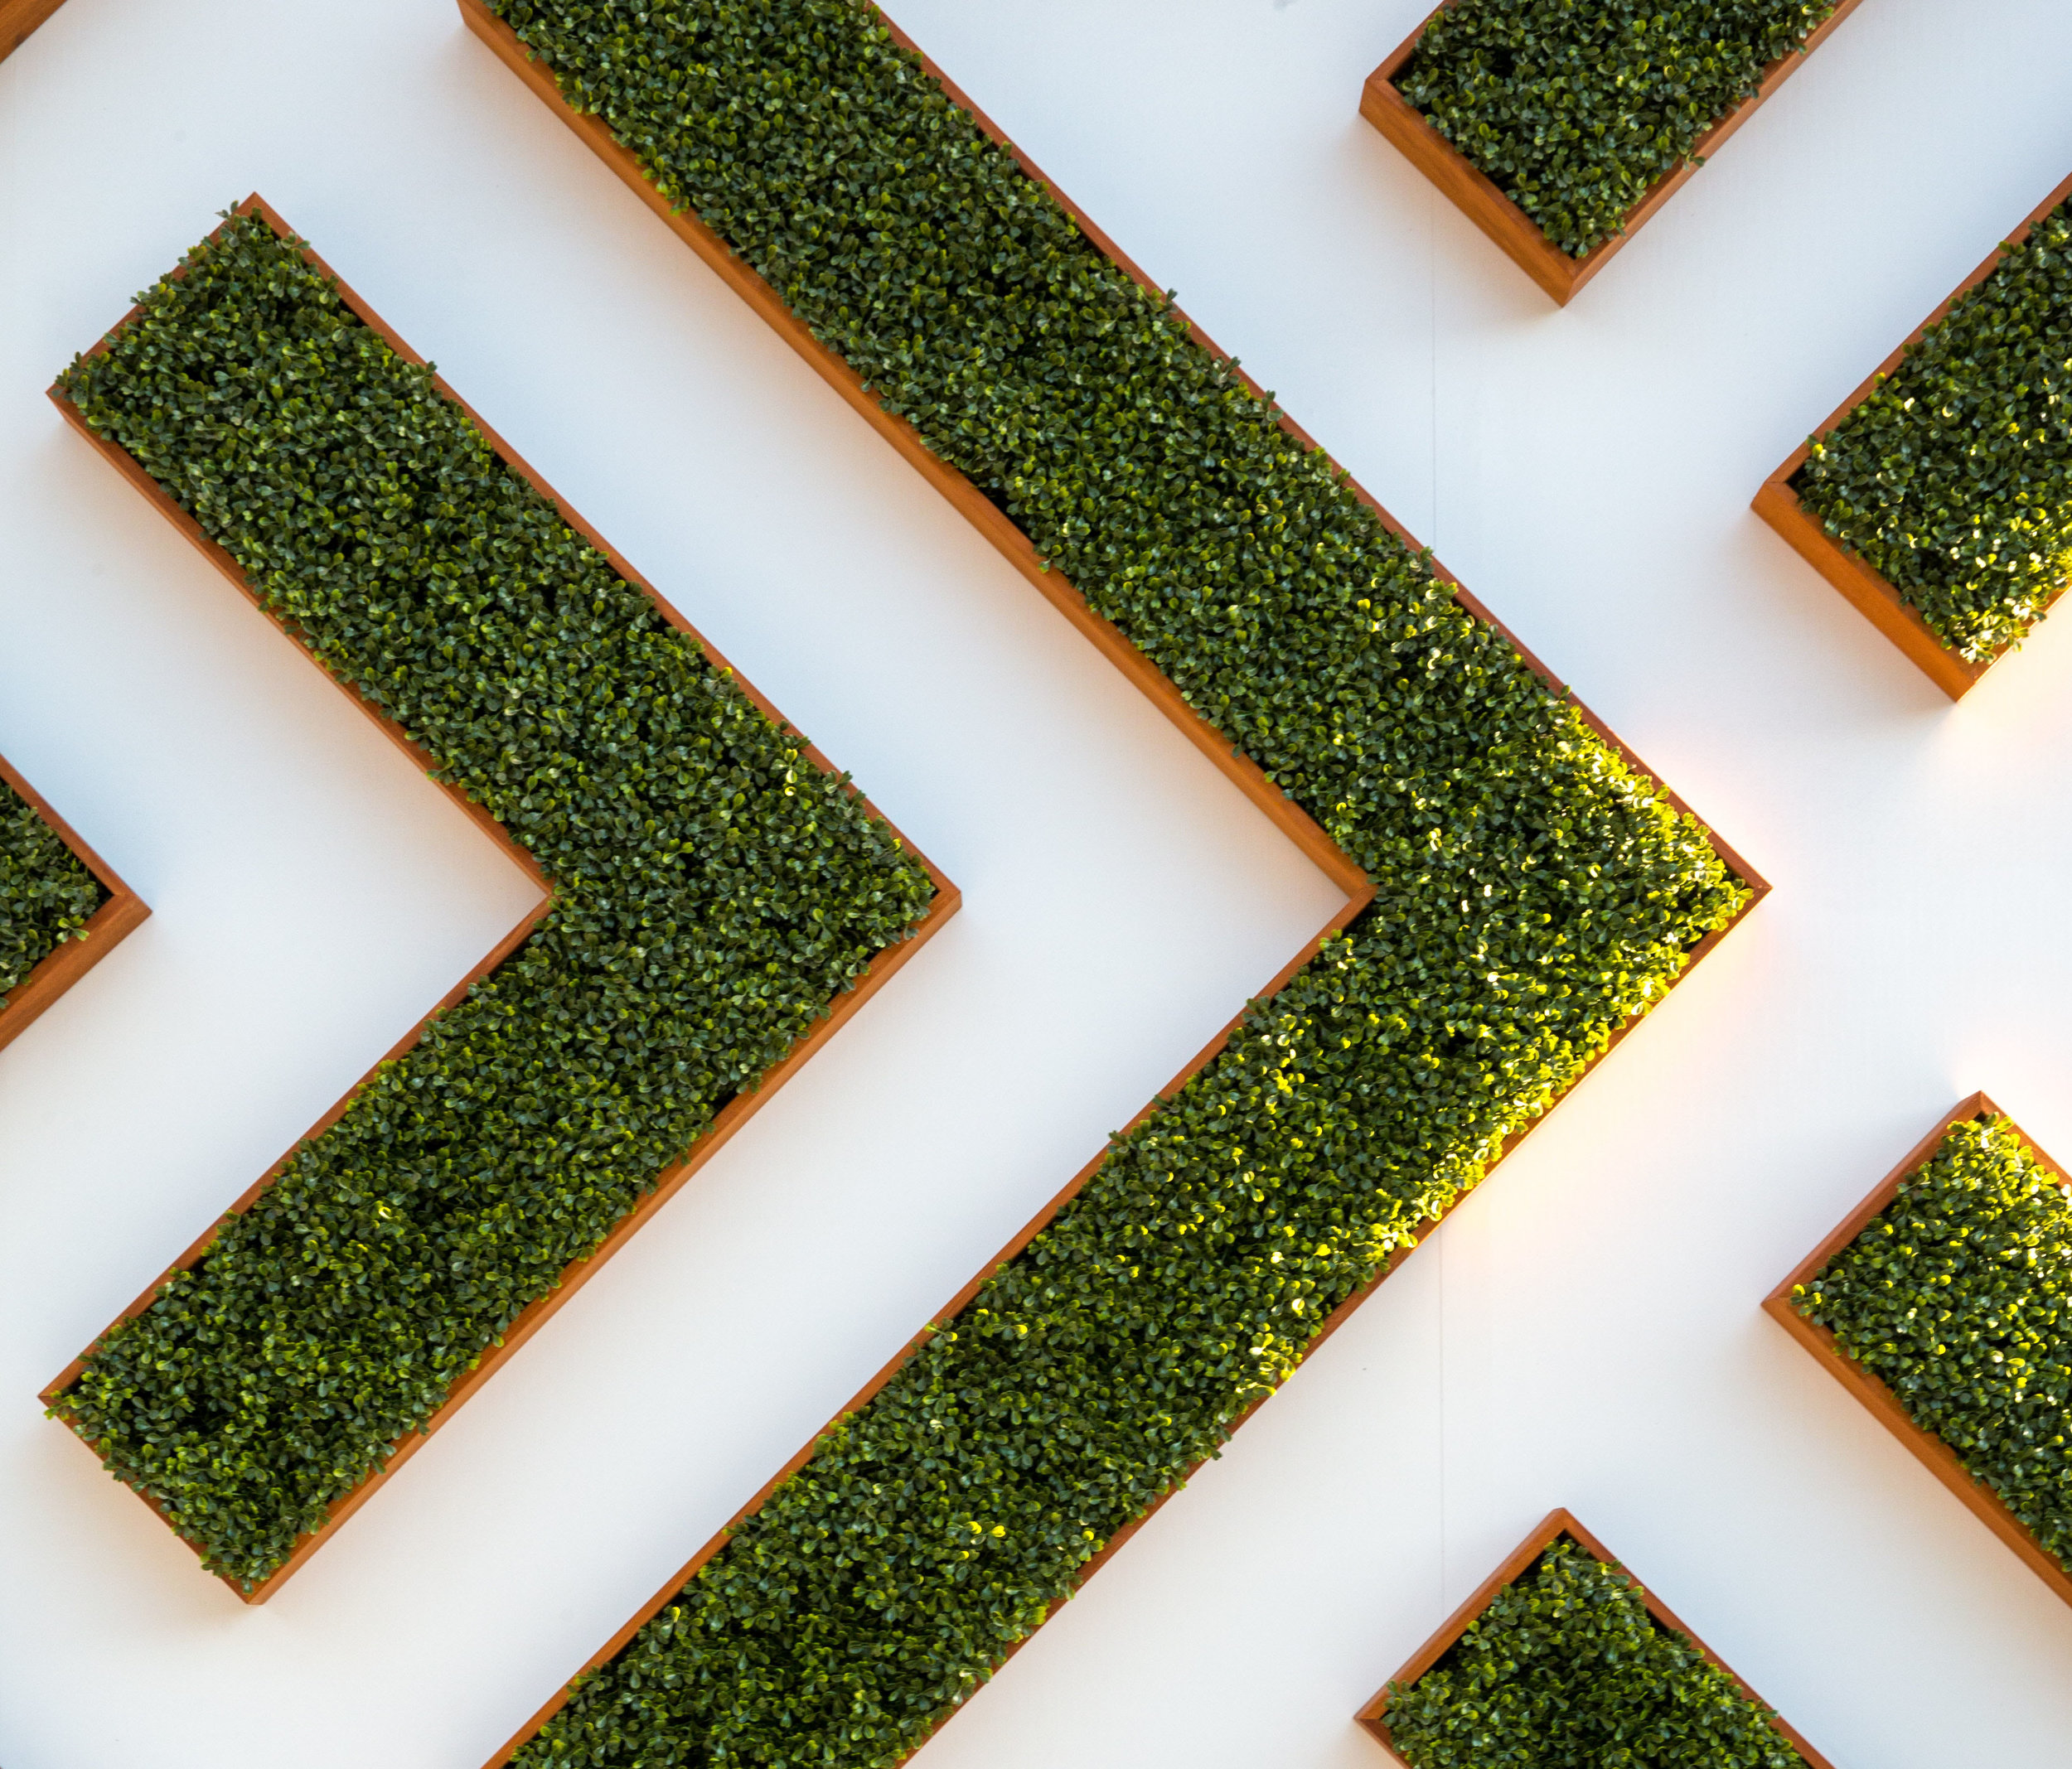 photo of planters from above in and arrow pattern